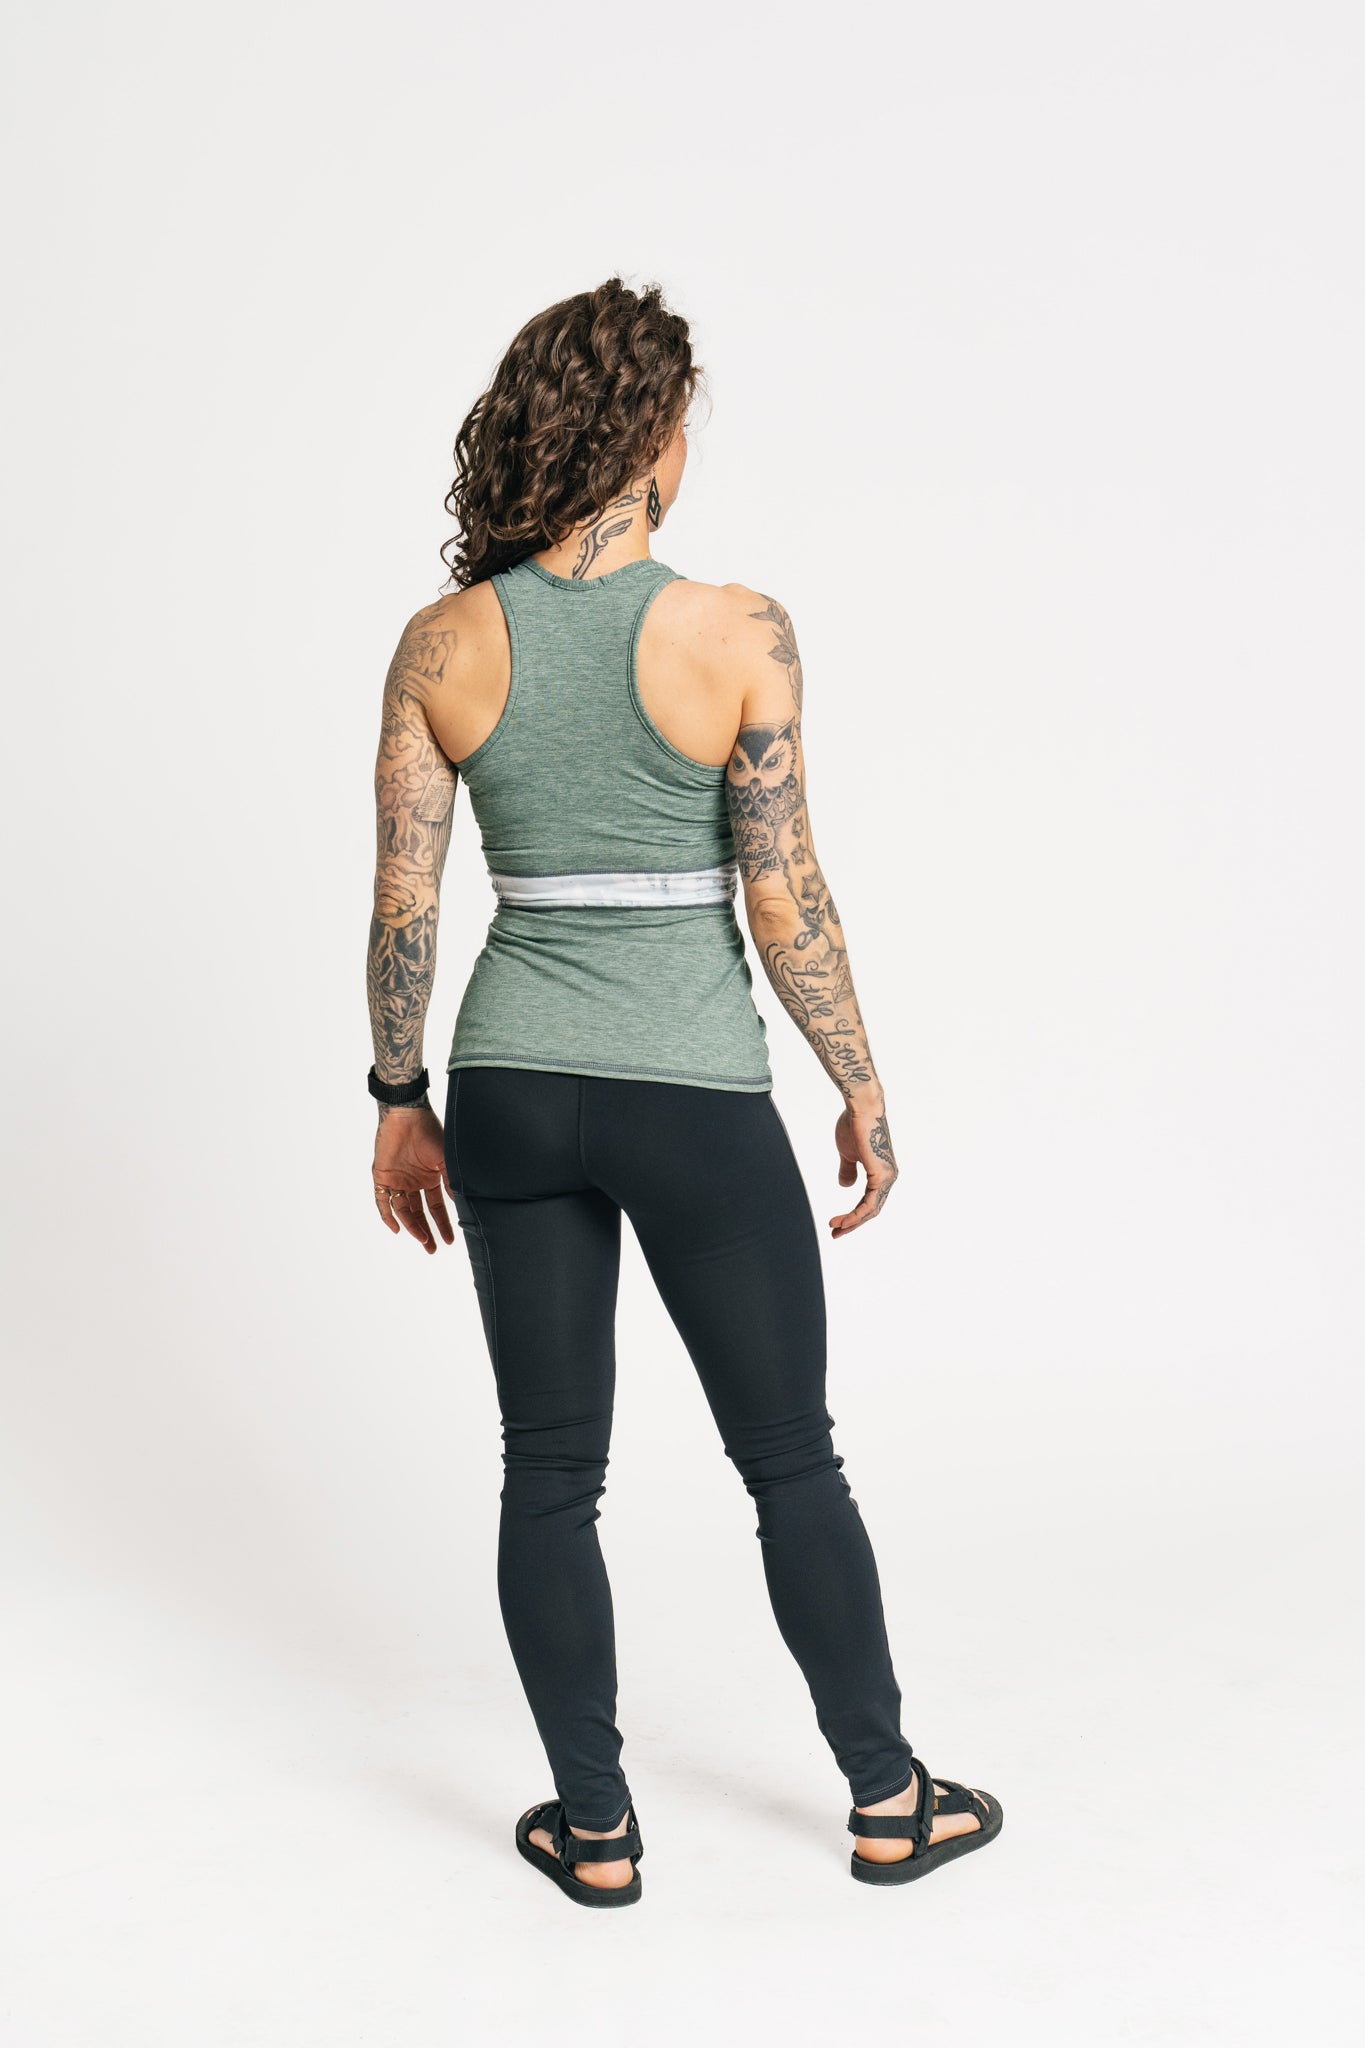 alpine fit tank top on petite model from behind